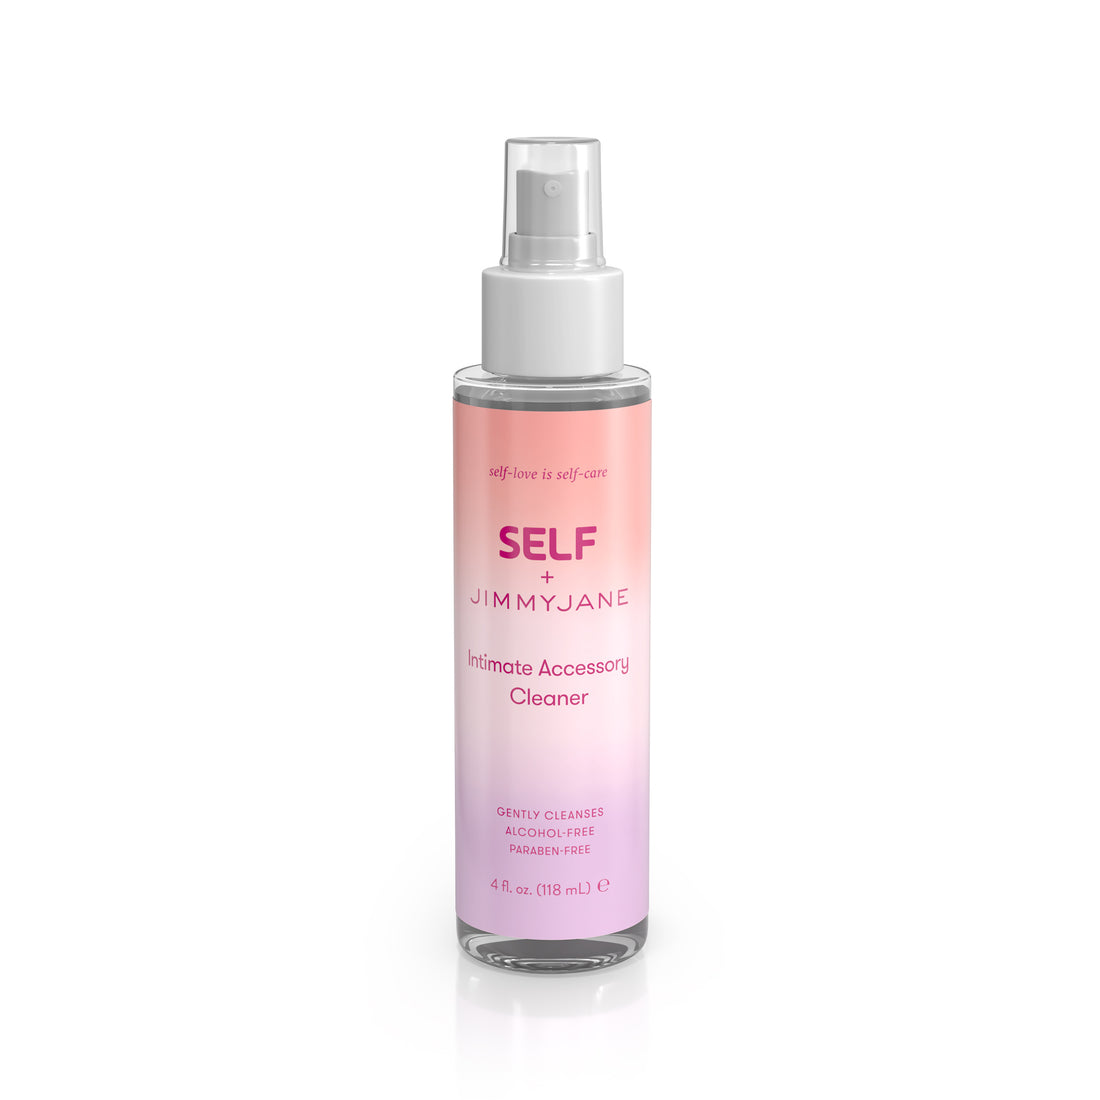 Self + Jimmyjane Intimate Accessory Cleaner 4.0 fl. oz. bottle front view